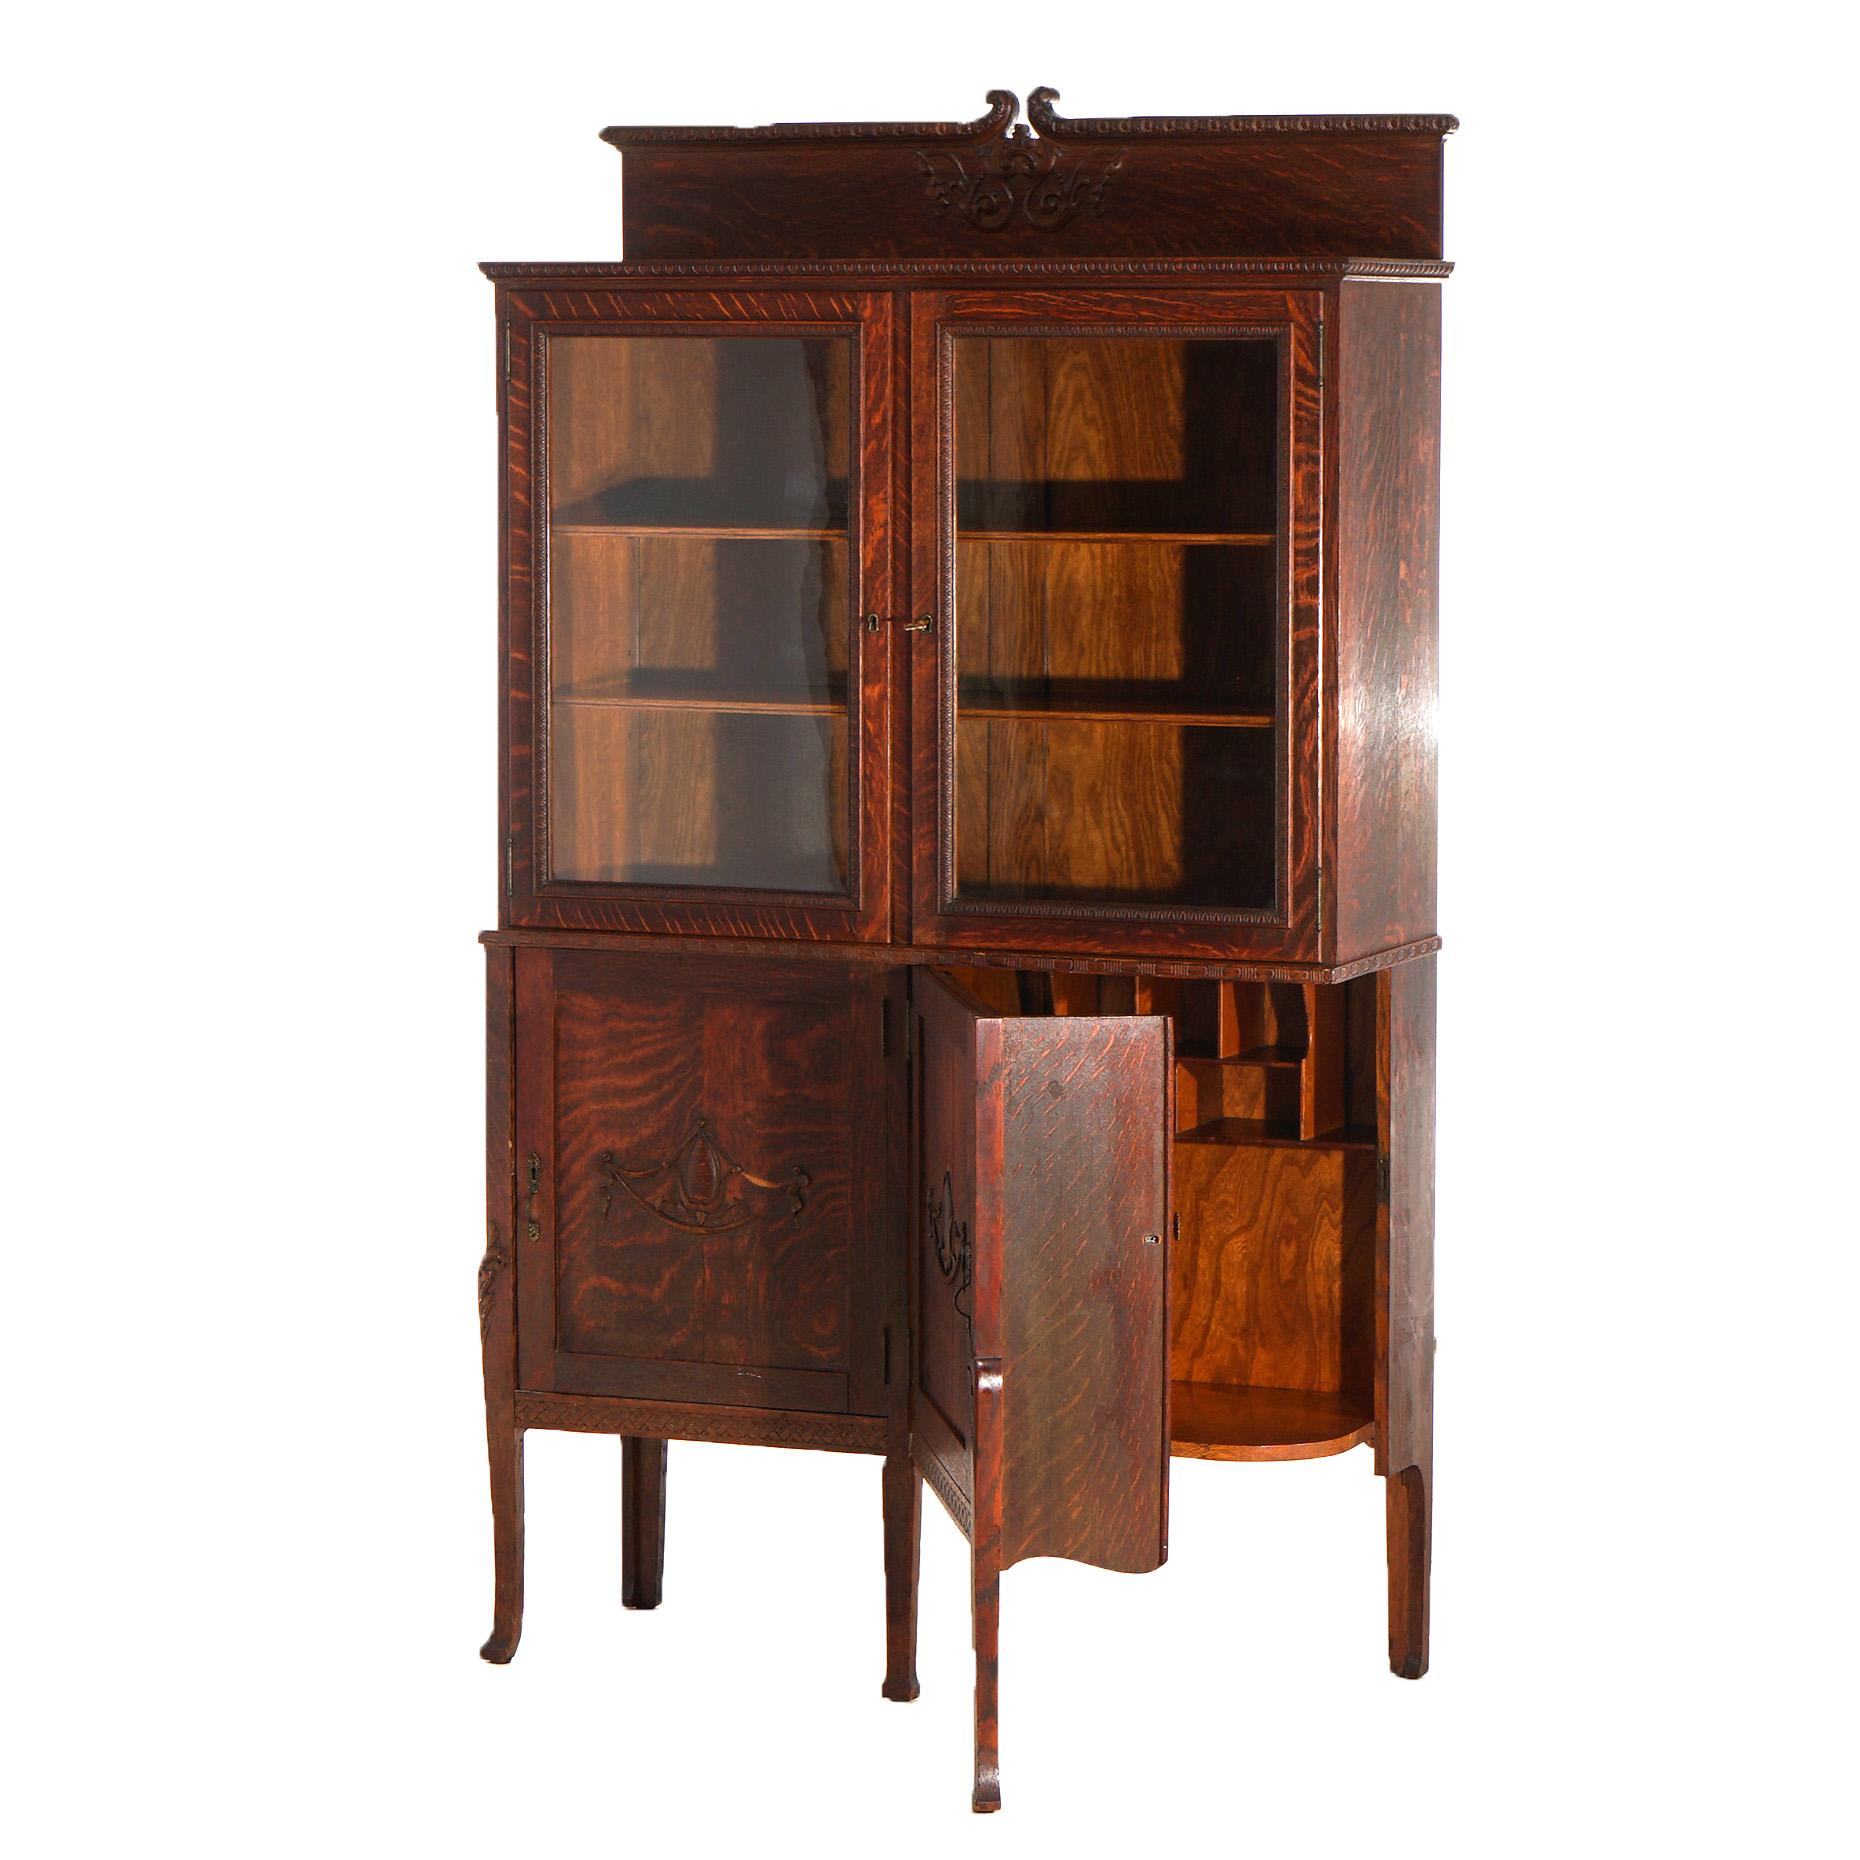 ***Ask About Reduced In-House Shipping Rates - Reliable Service & Fully Insured***

An antique secretary in the manner of Horner offers quarter sawn oak construction with double door bookcase having crest with carved scroll elements over lower case